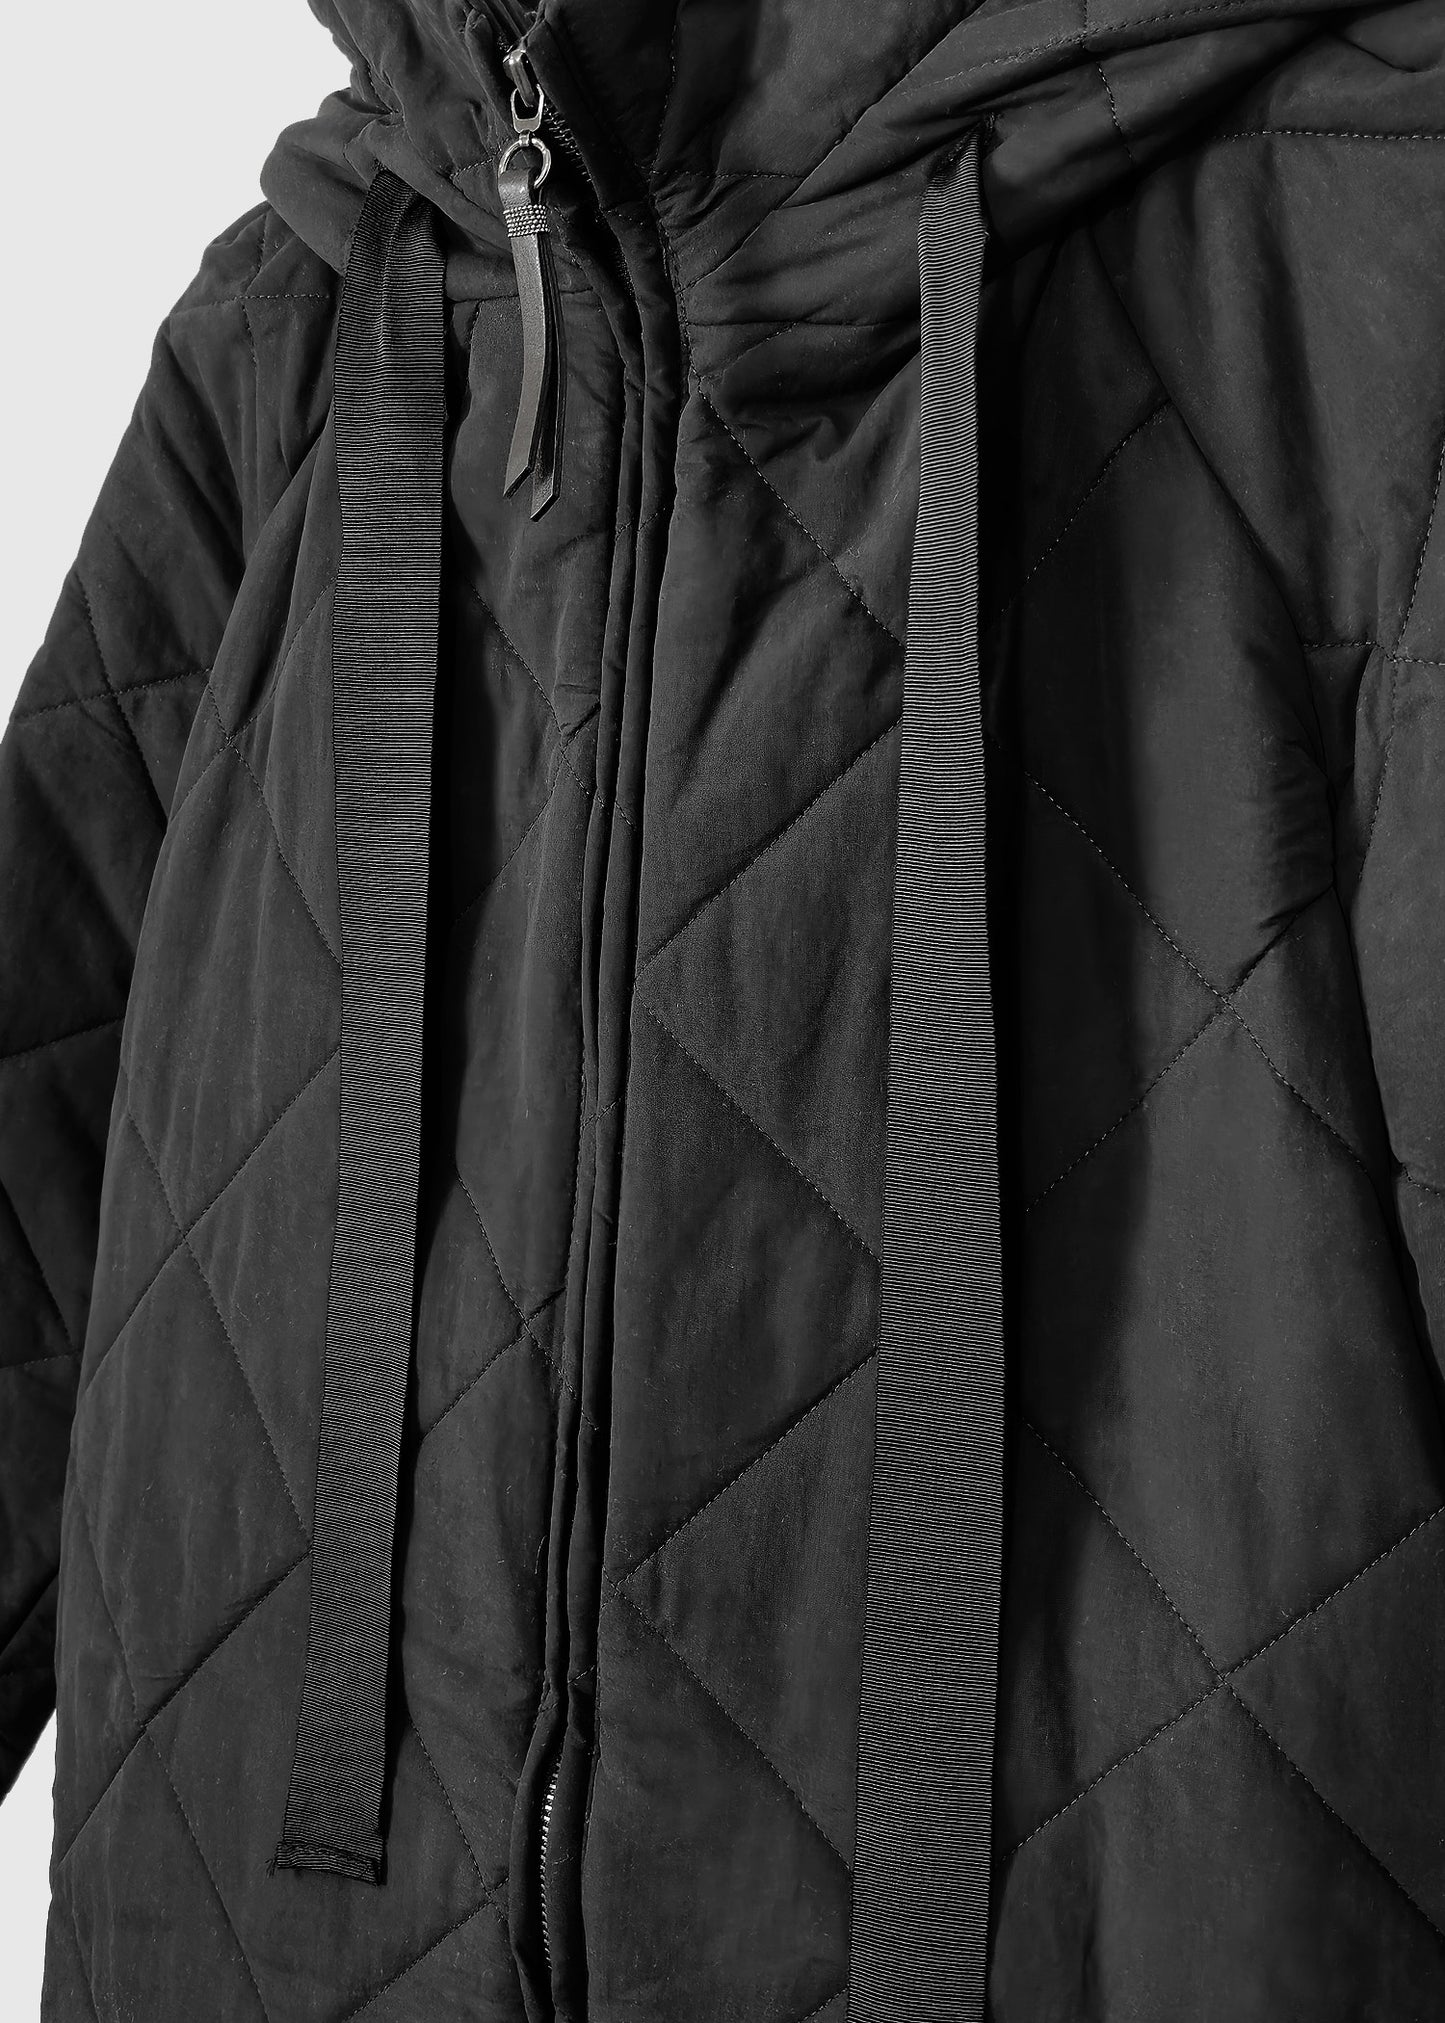 REIGN Quilted Coat